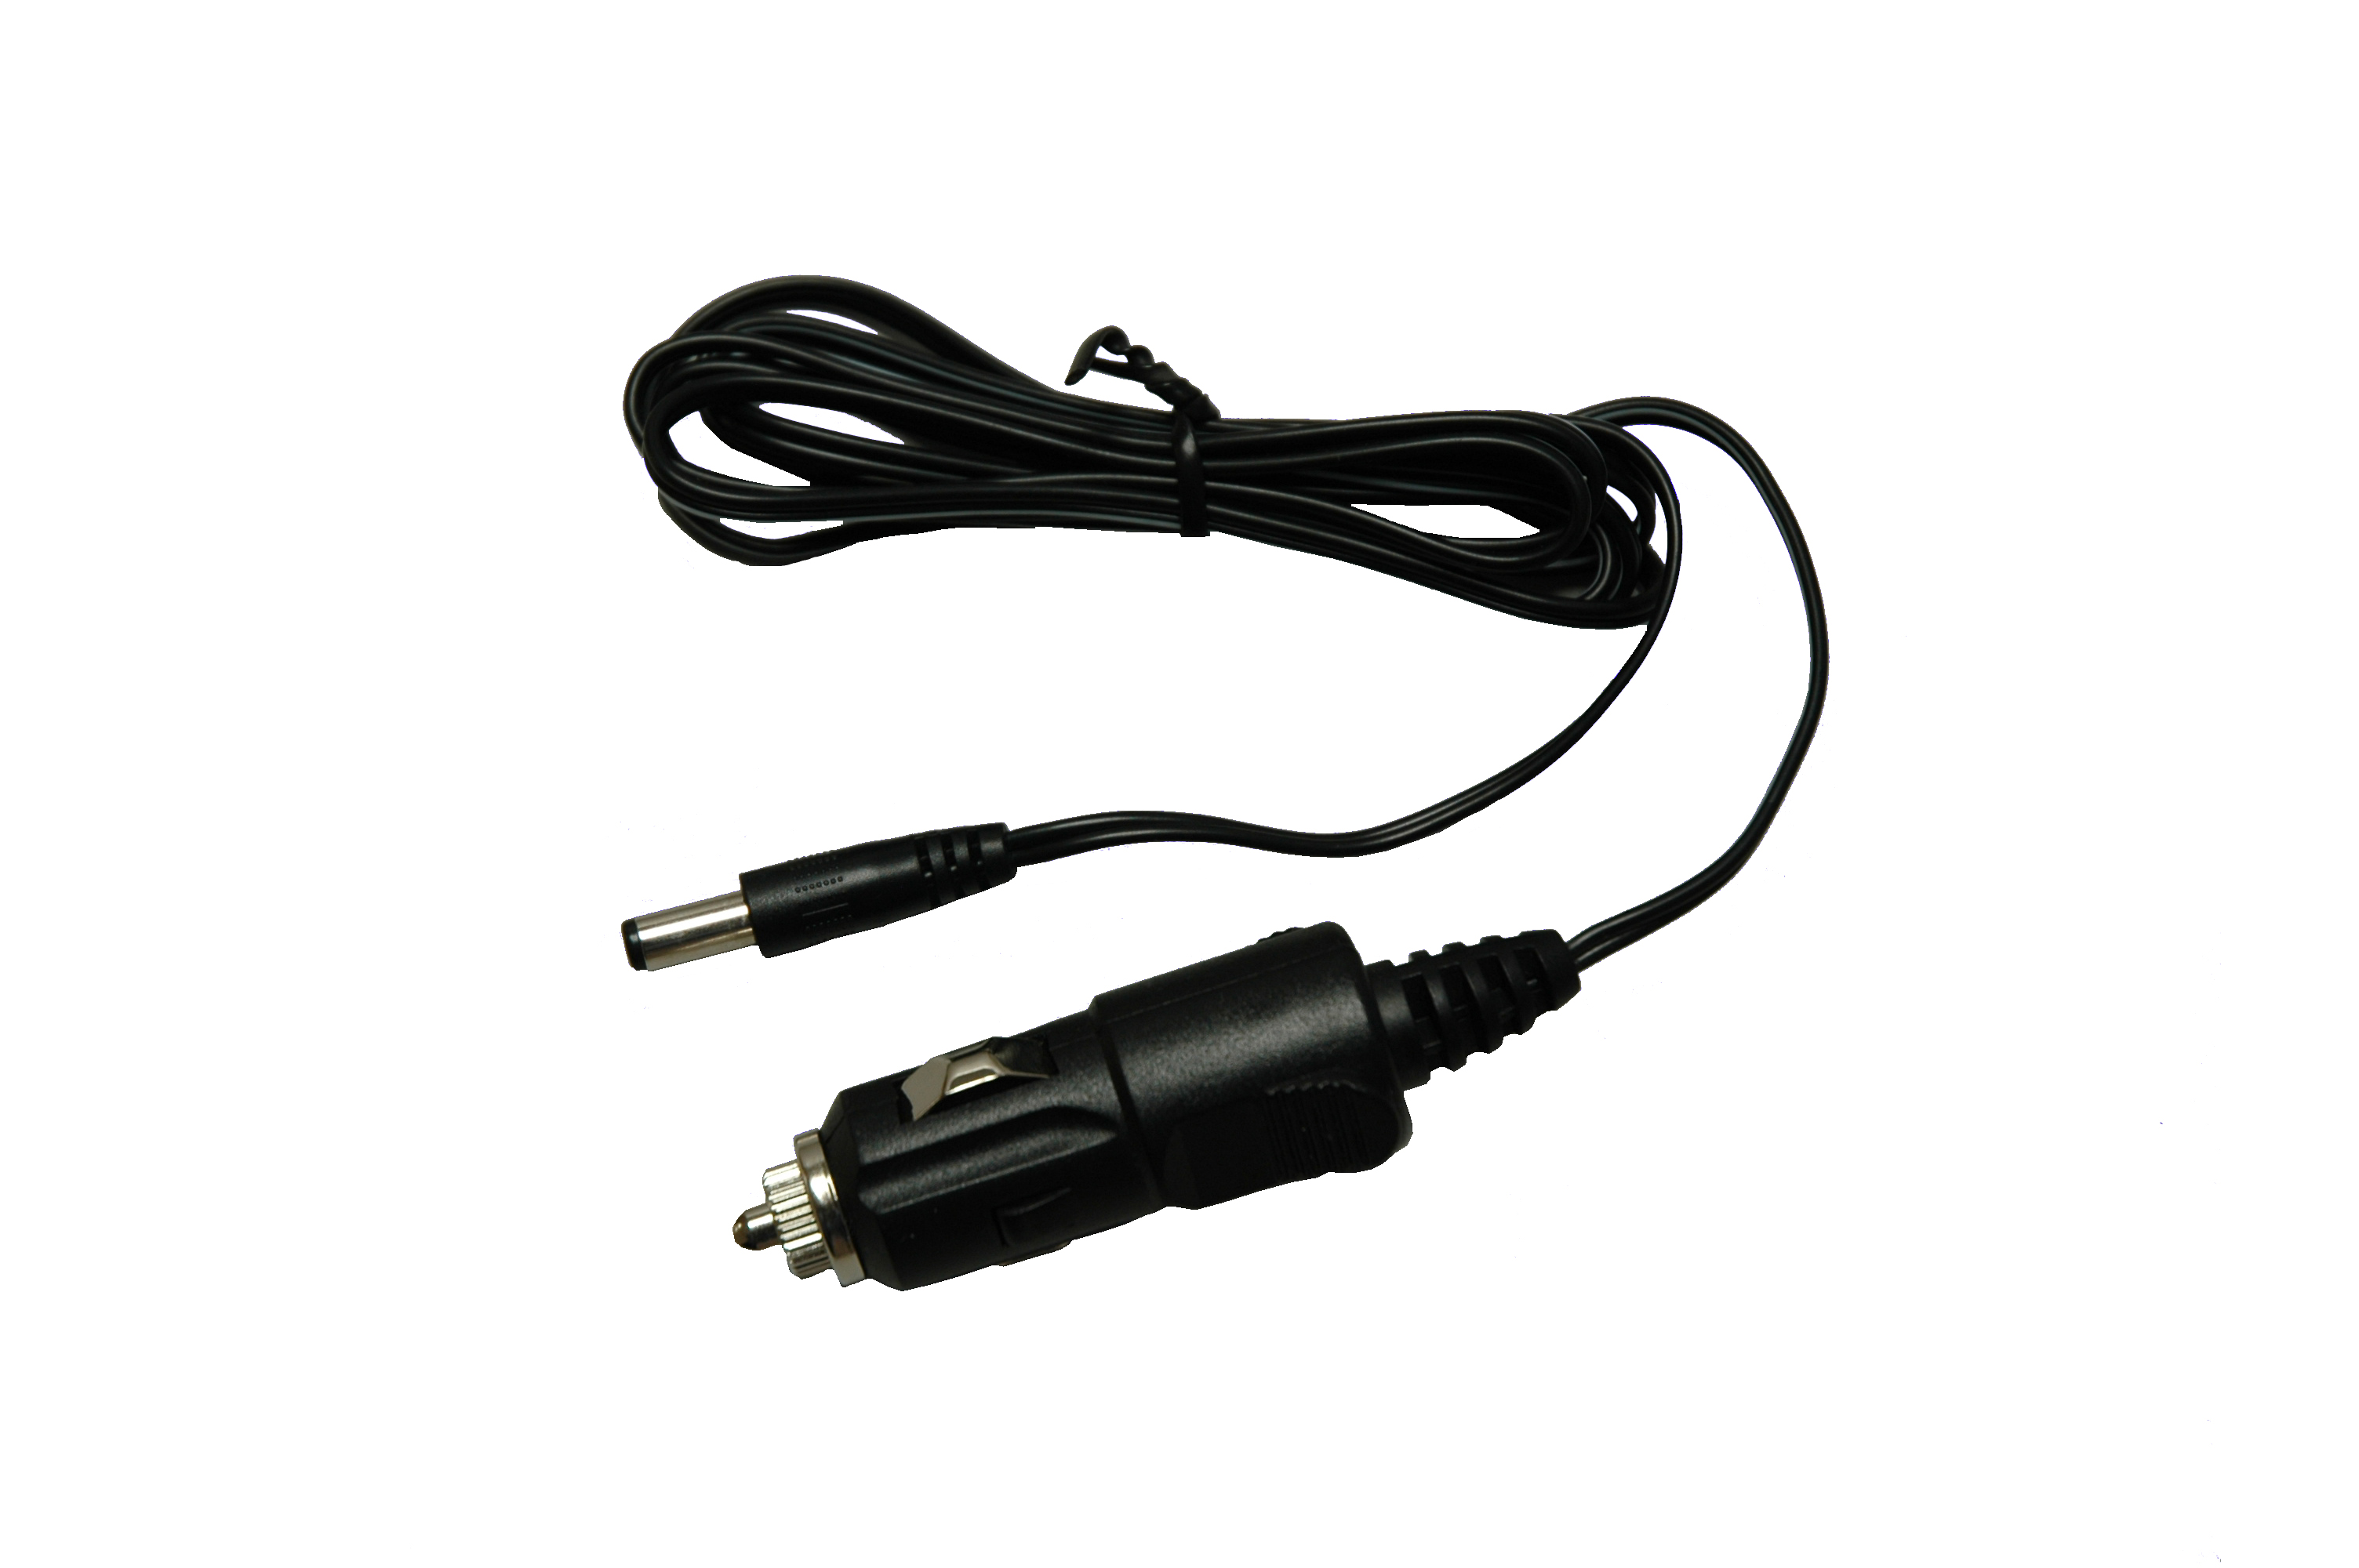 PowerFlare Replacement Power Cable for the PF-200 Rechargeable